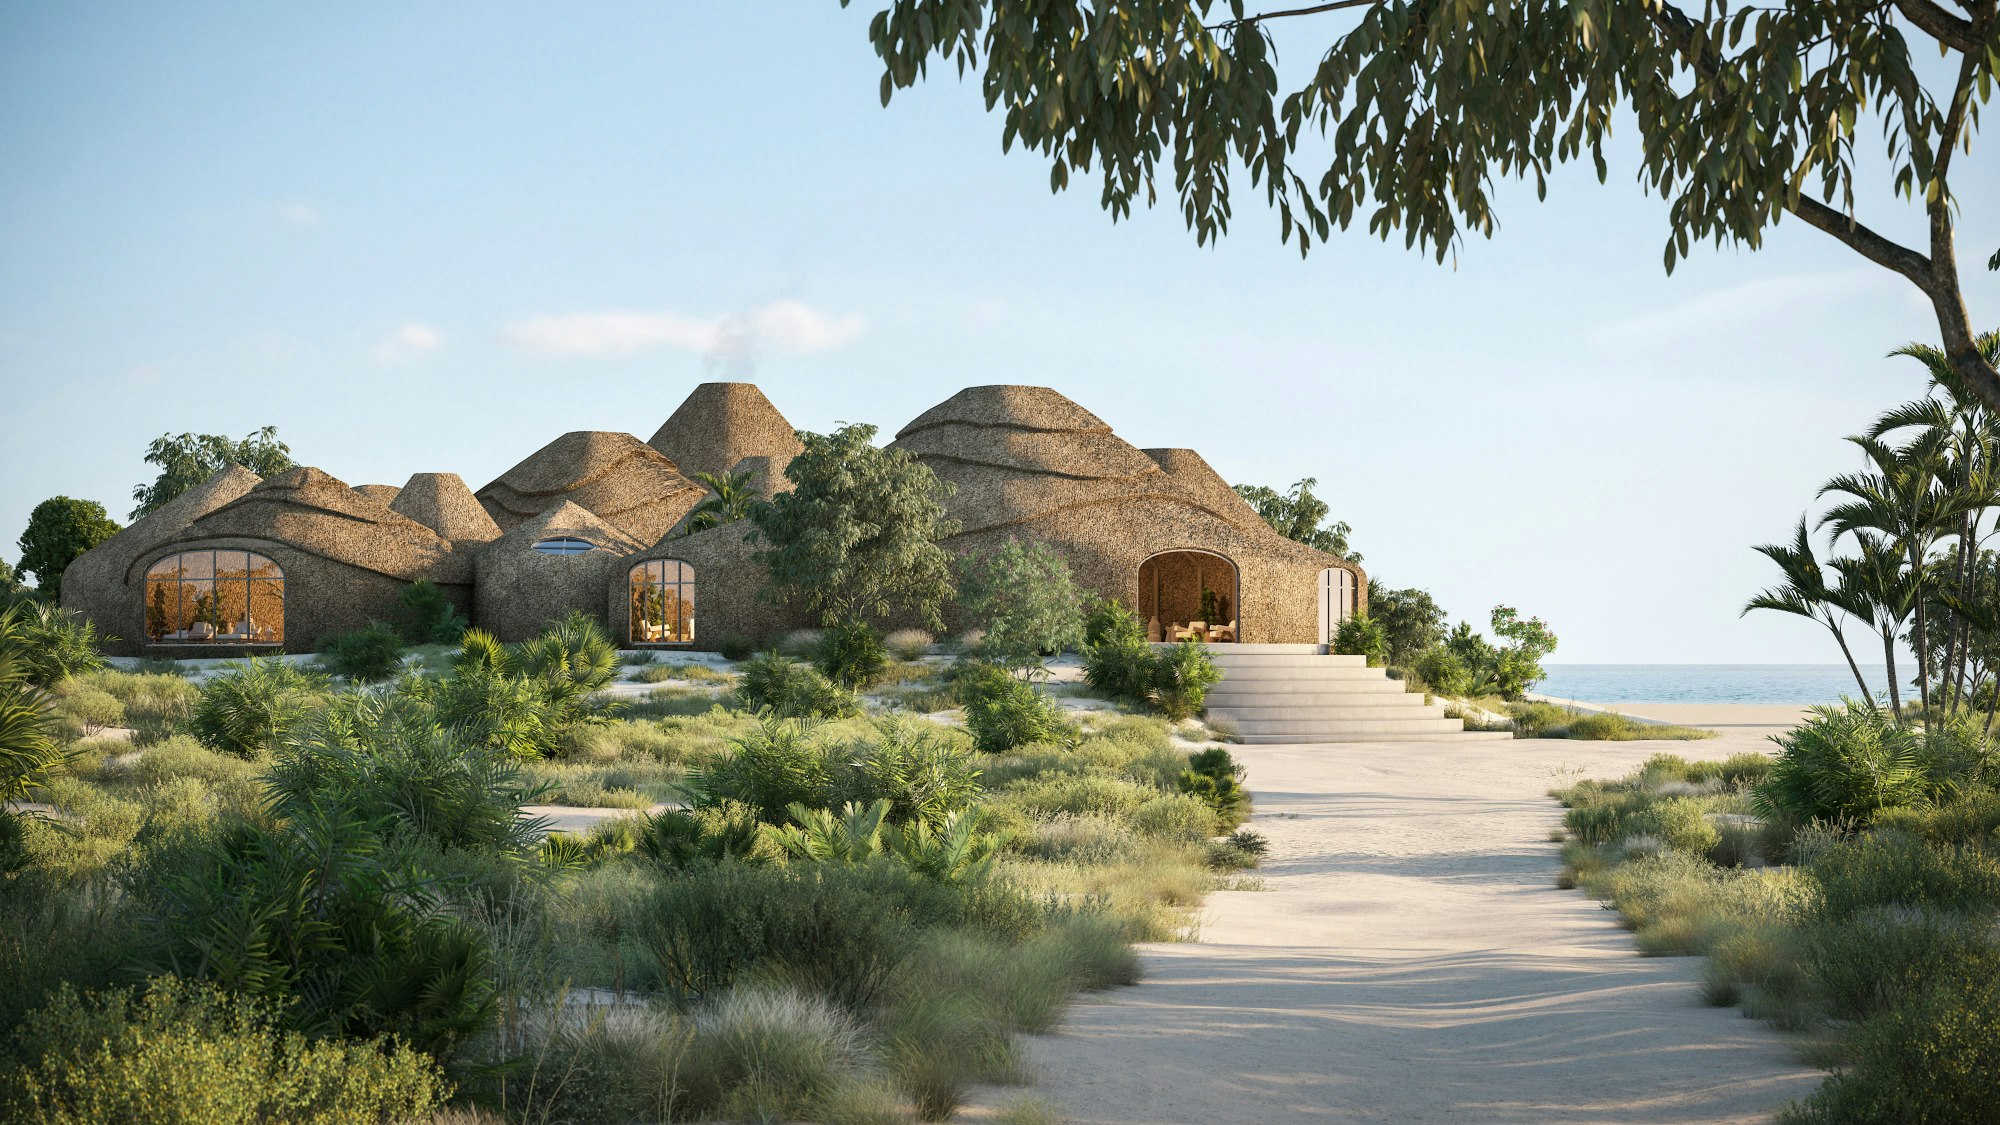 A collection of thatched bungalows on a resort island